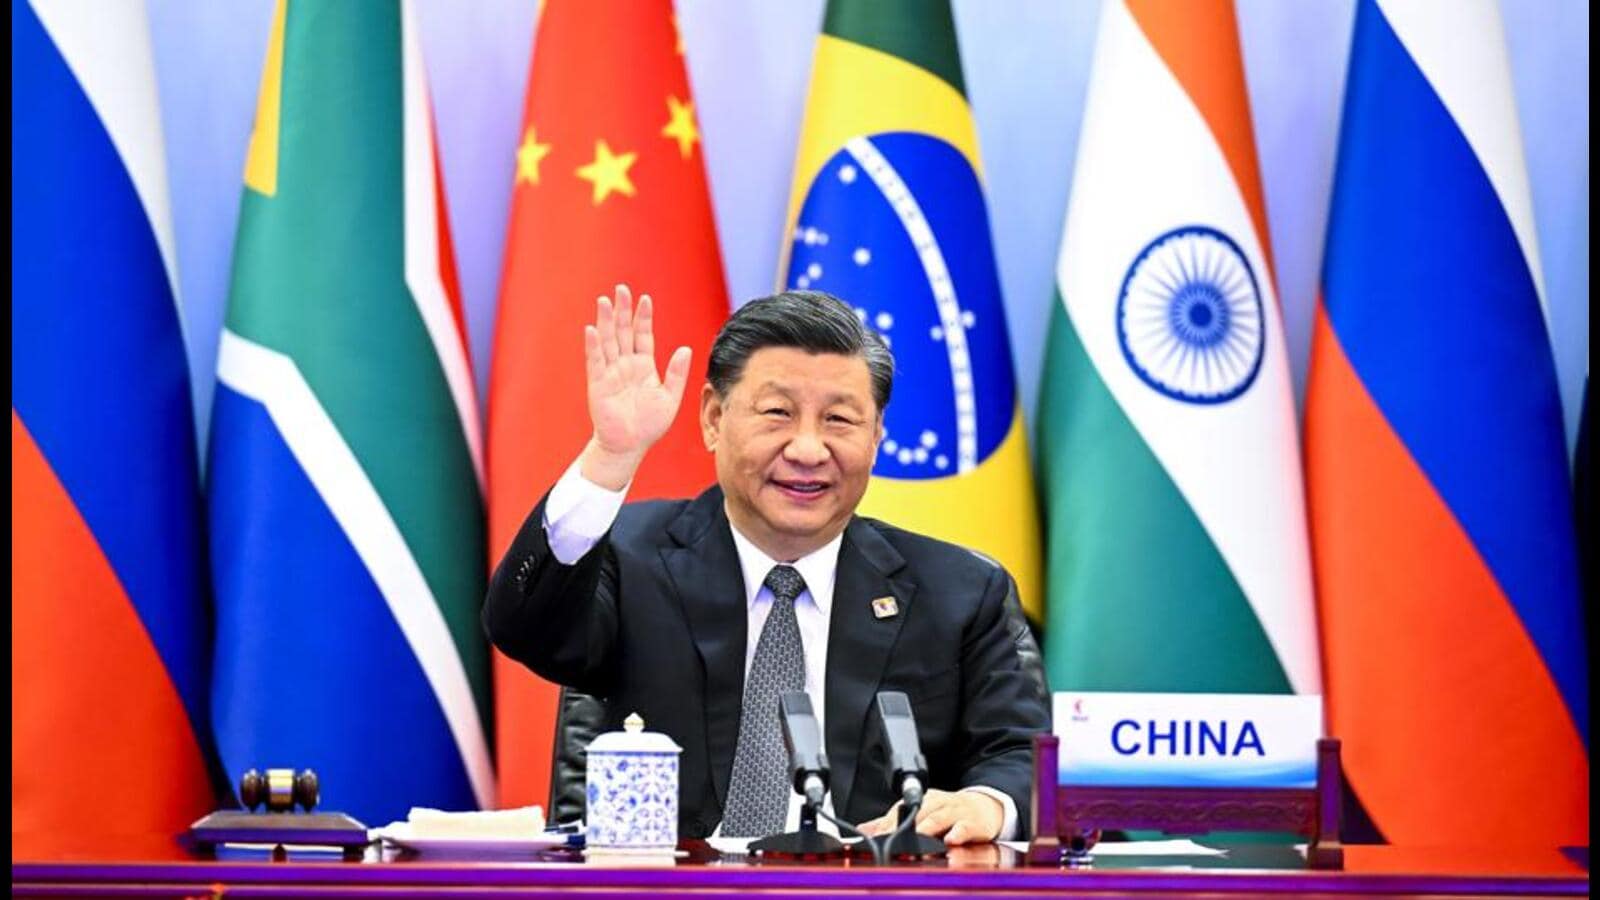 china criticises blocs, invites 13 countries to brics-related event | world news - hindustan times